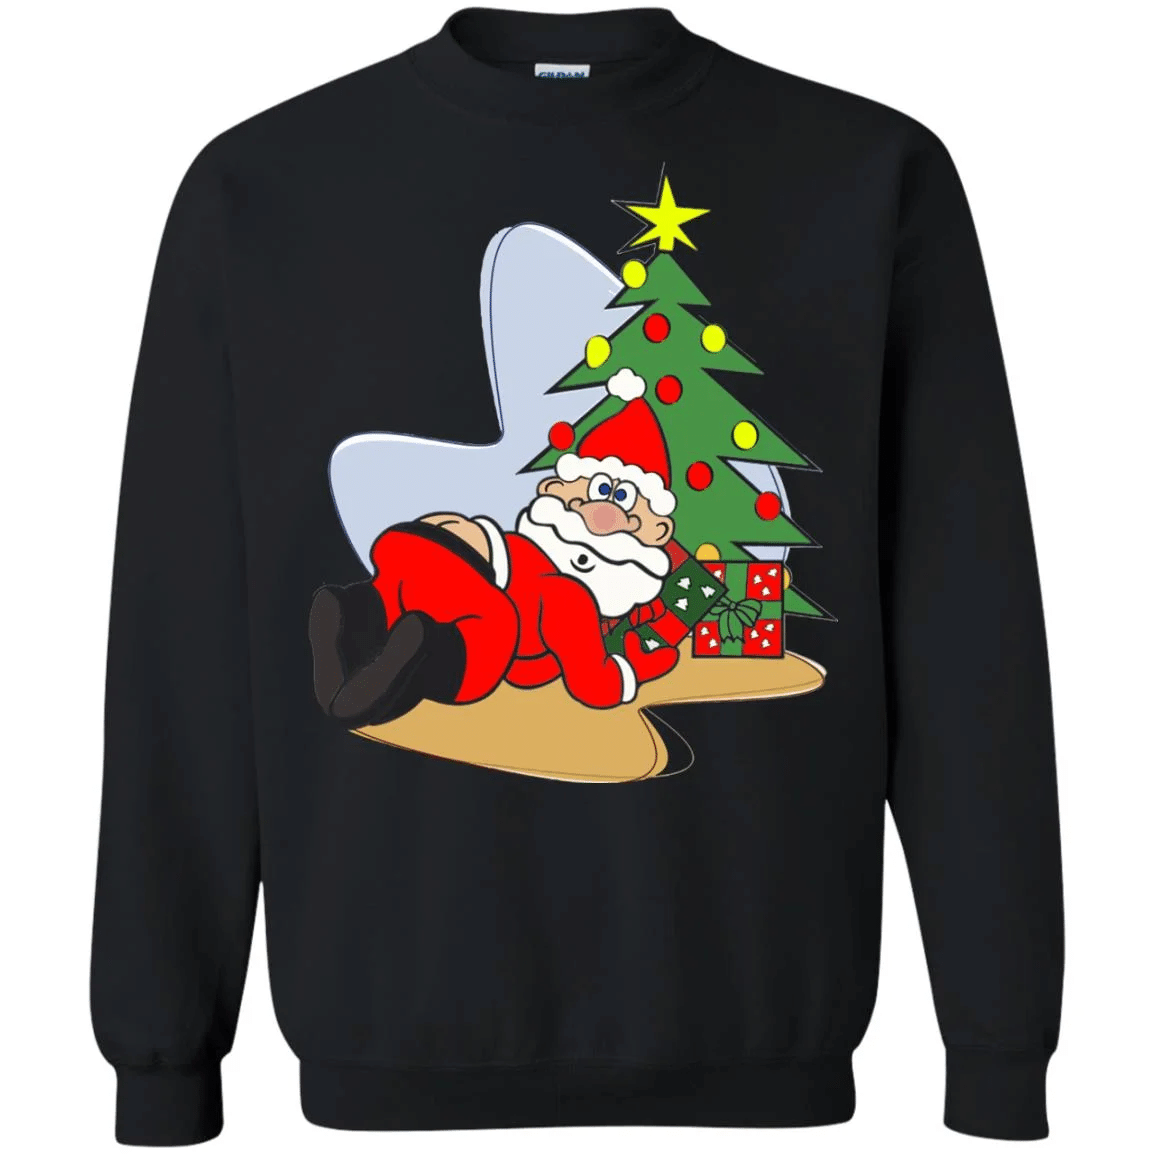 Merry Christmas with Santa Claus gift and Christmas tree Style: Sweatshirt, Color: Black